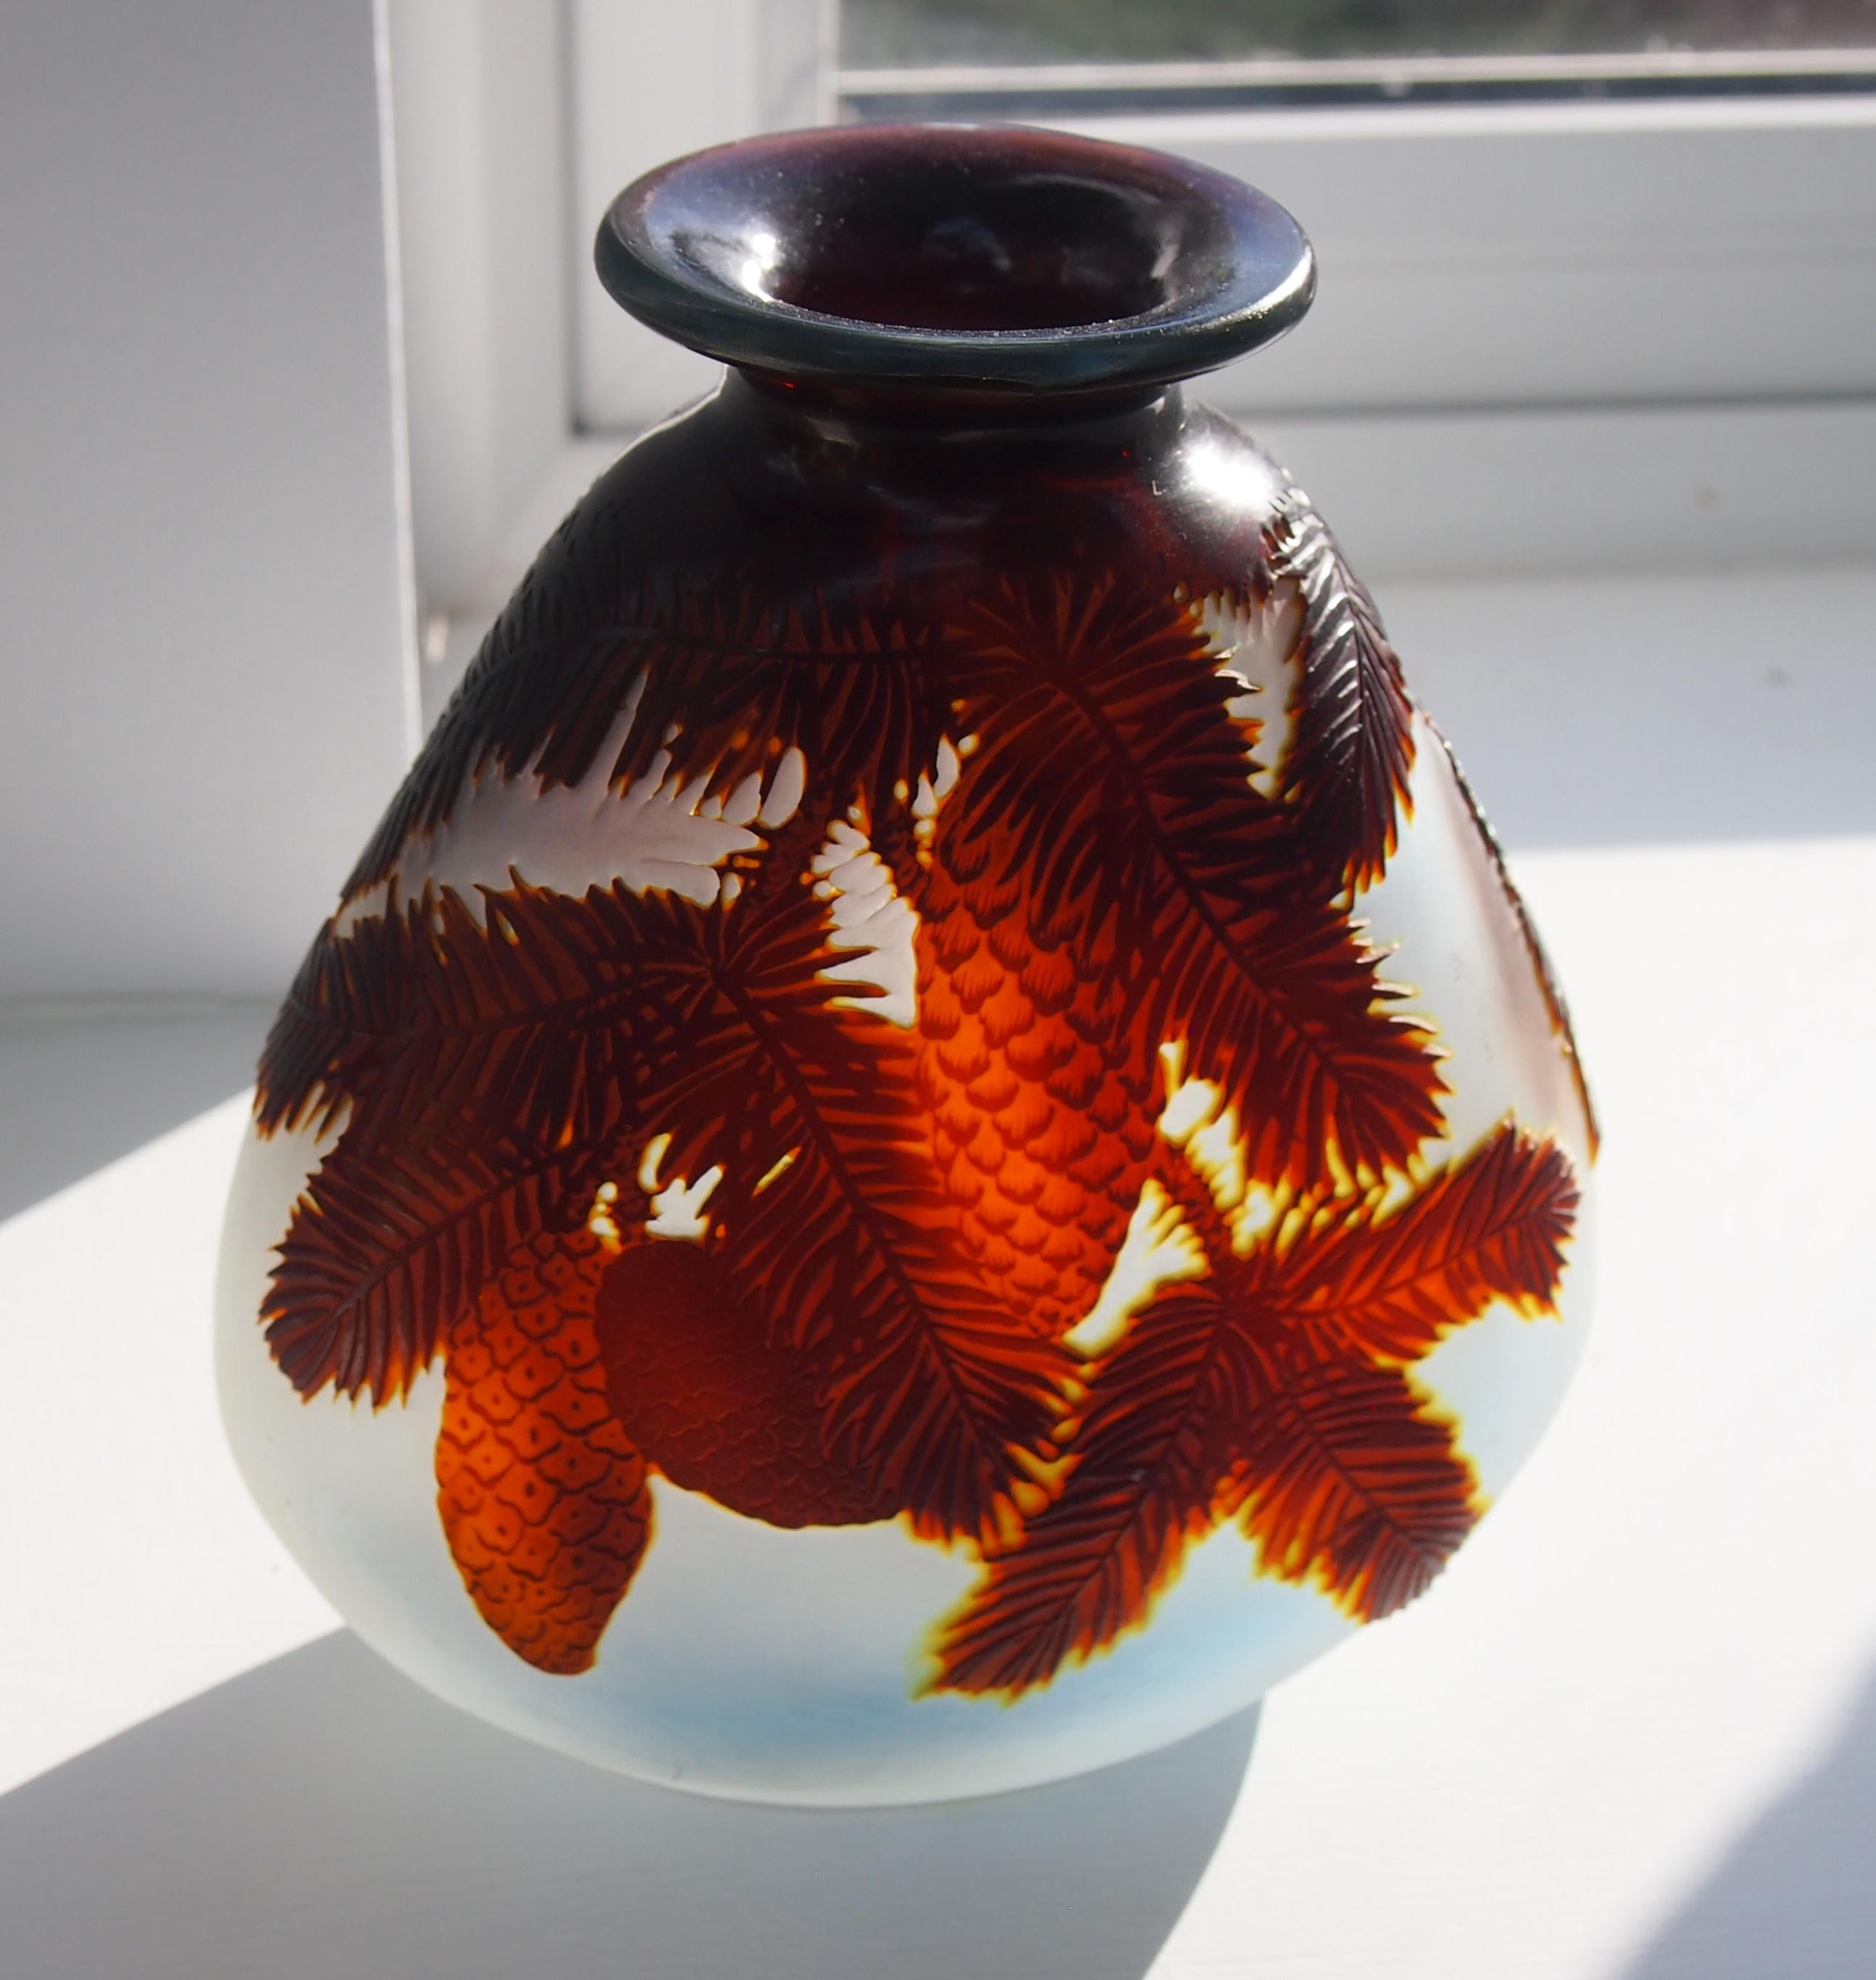 Fabulous Triangular Emile Galle in blue and brown cameo vase with fircones c1925 For Sale 1